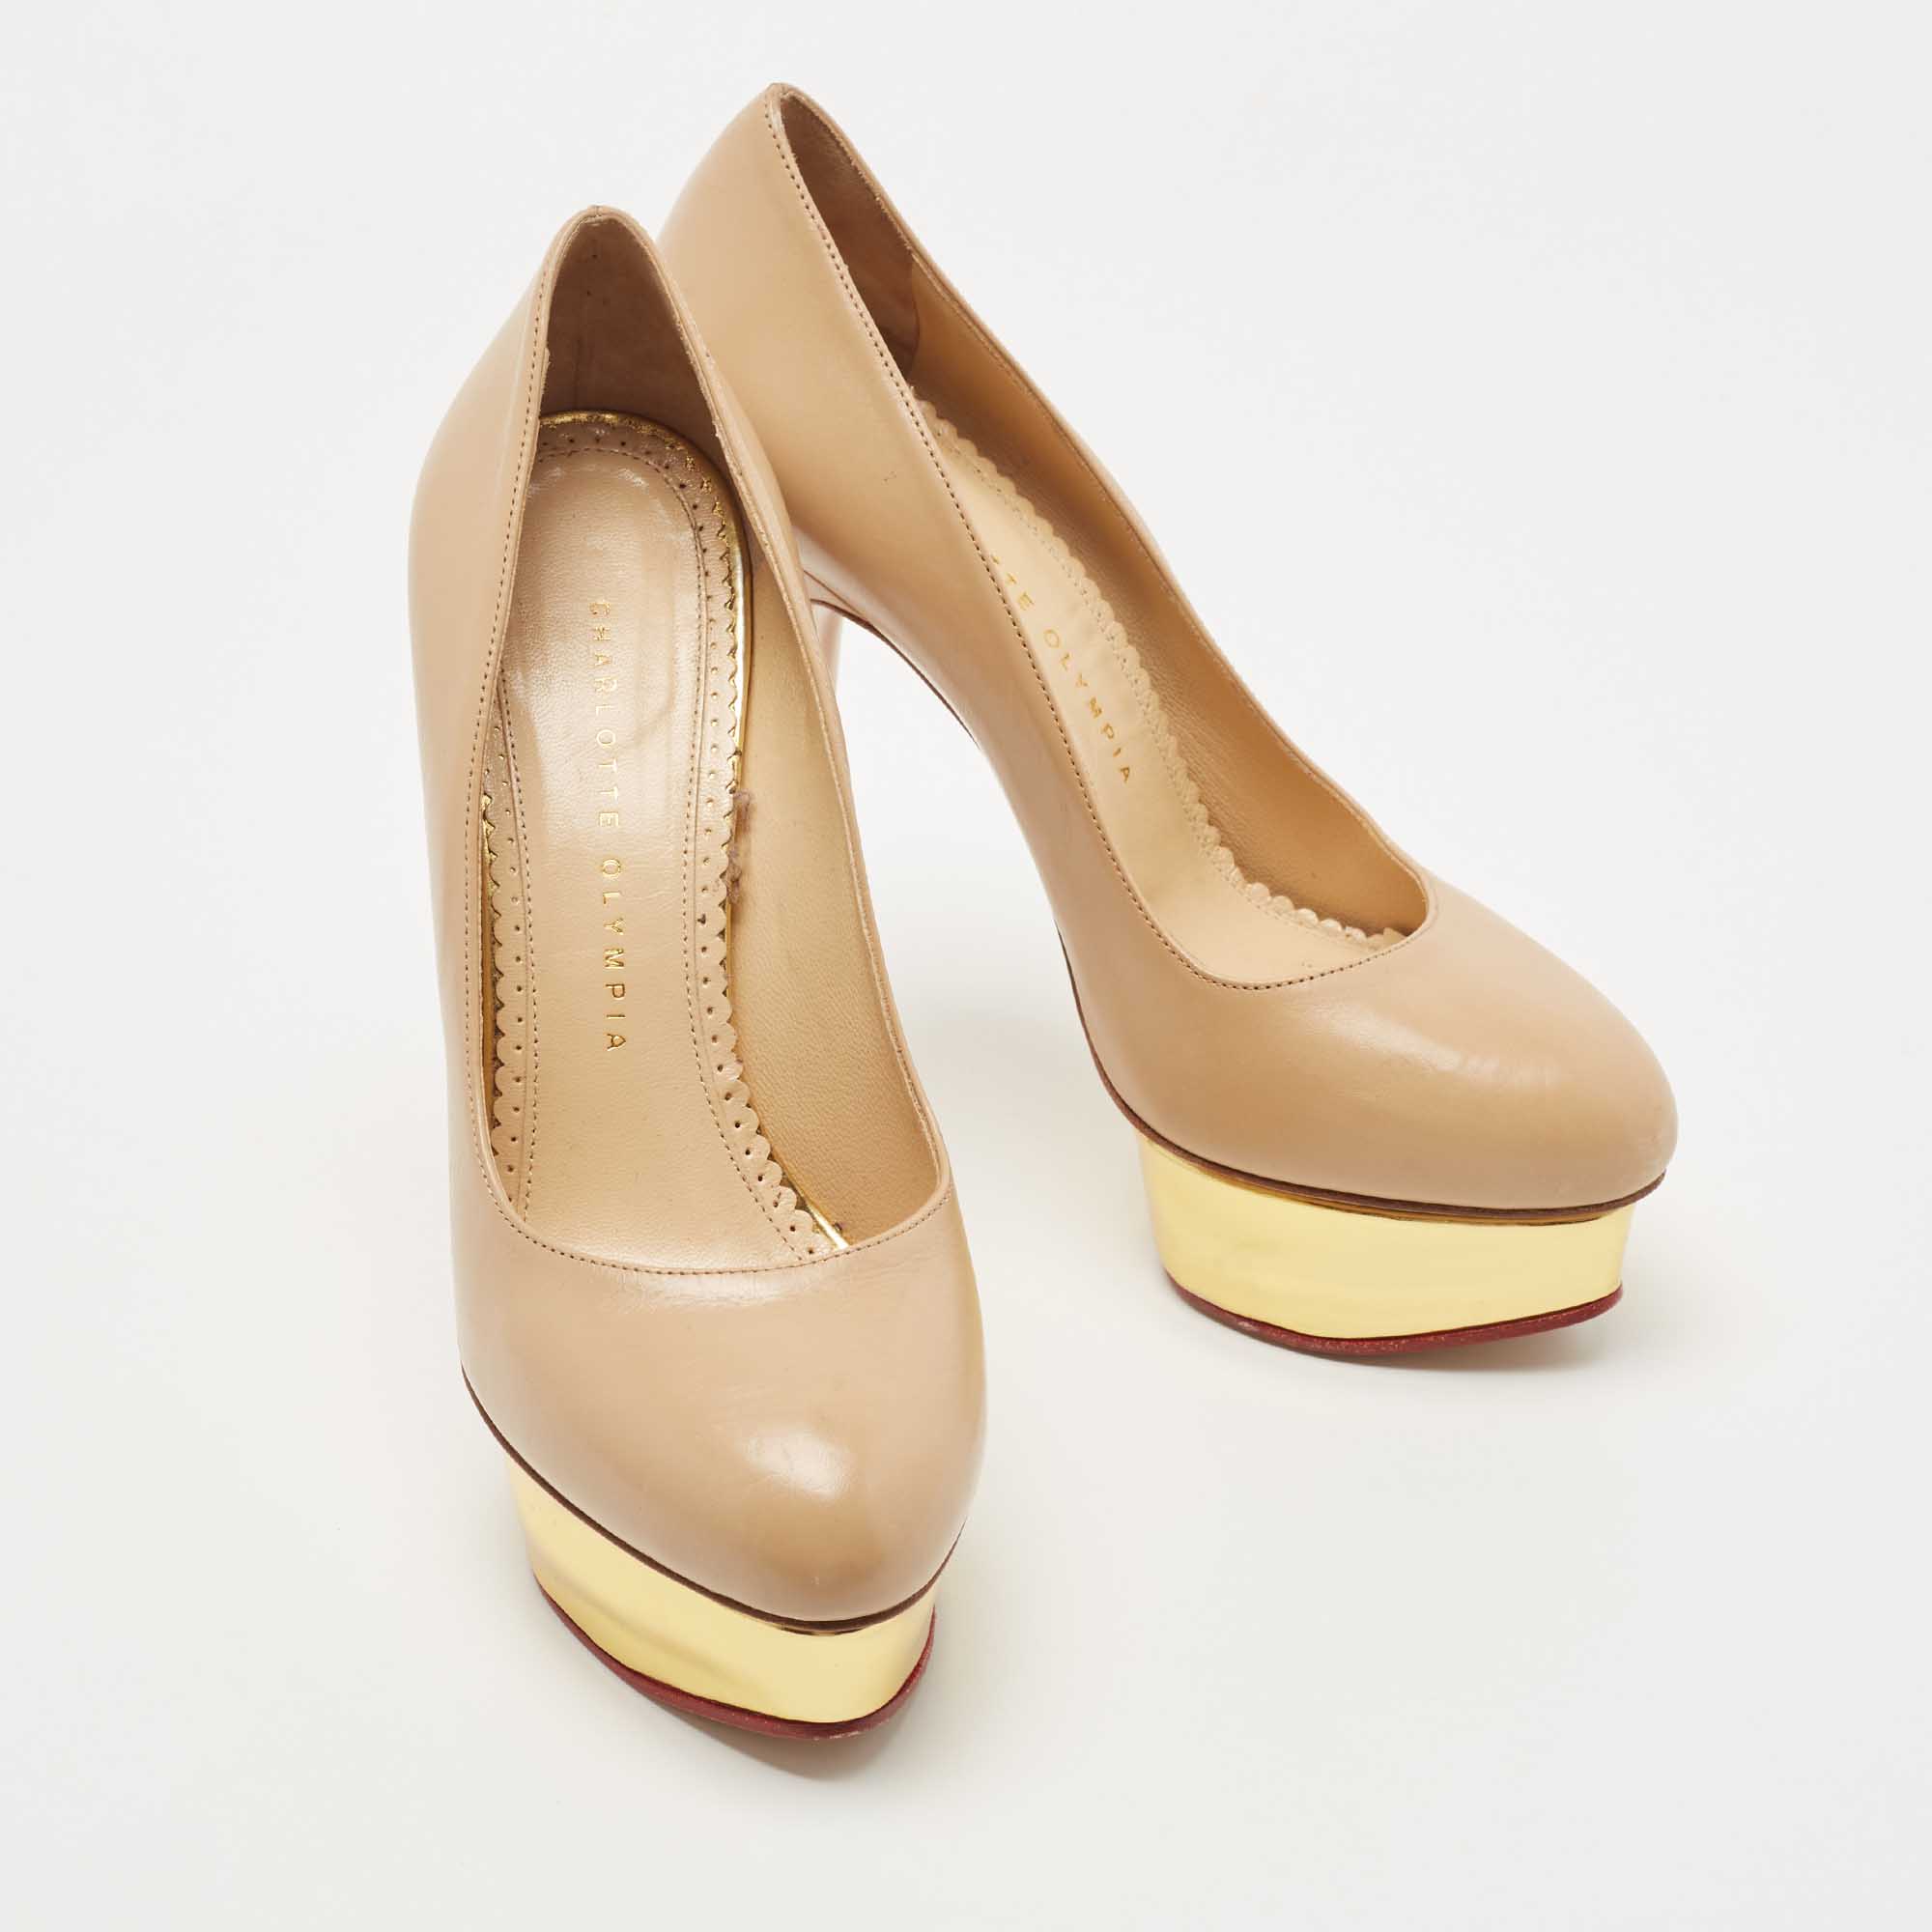 Charlotte Olympia Beige Leather Dolly Platform Pumps Size 38.5